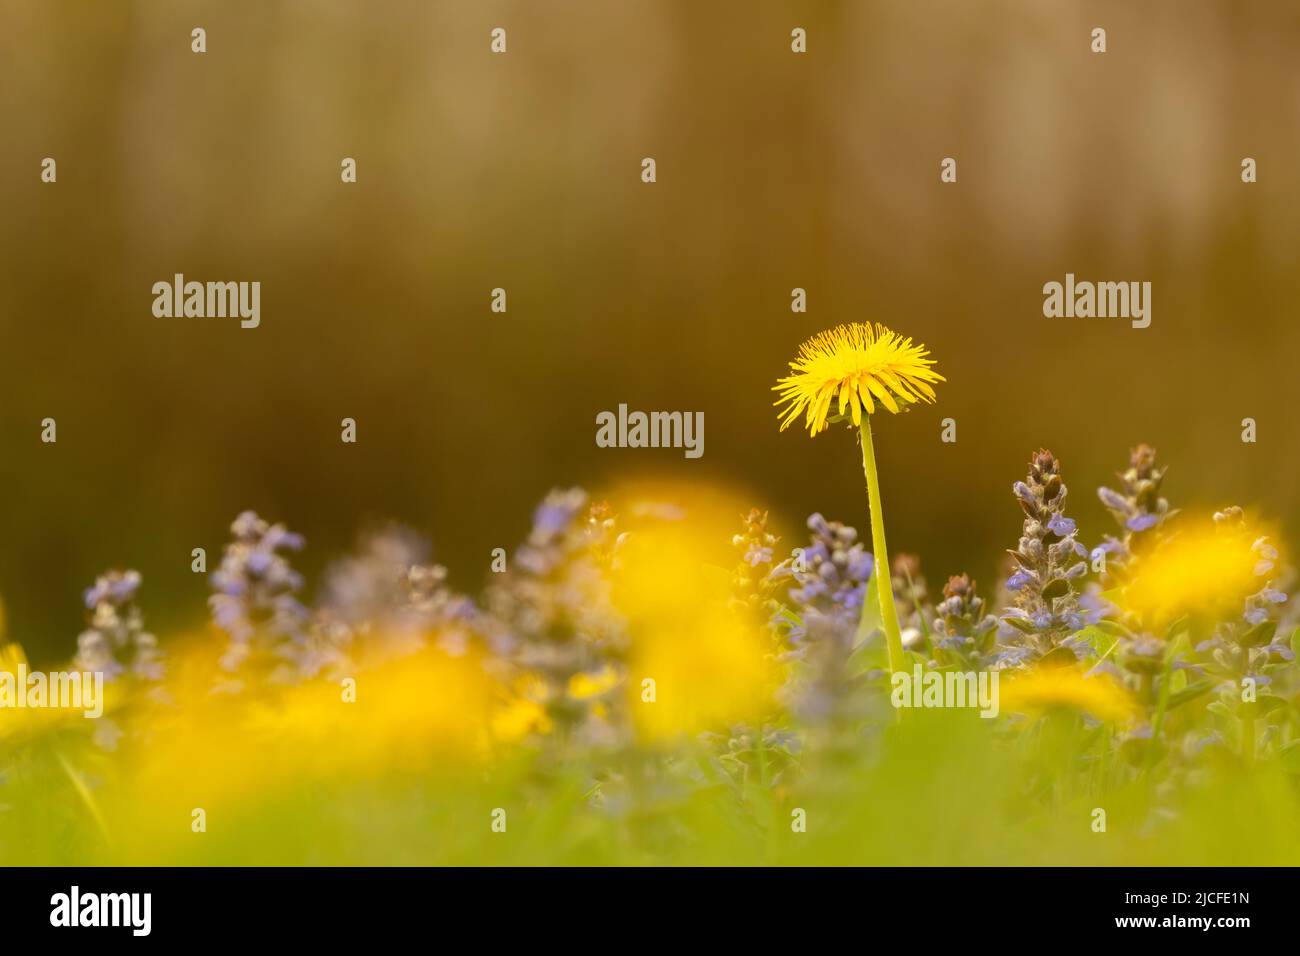 Bgleweed blossoms in a dense flower meadow with dandelions in spring, photographed between yellow dandelion flowers, the gold yellow dominates and glows. Stock Photo